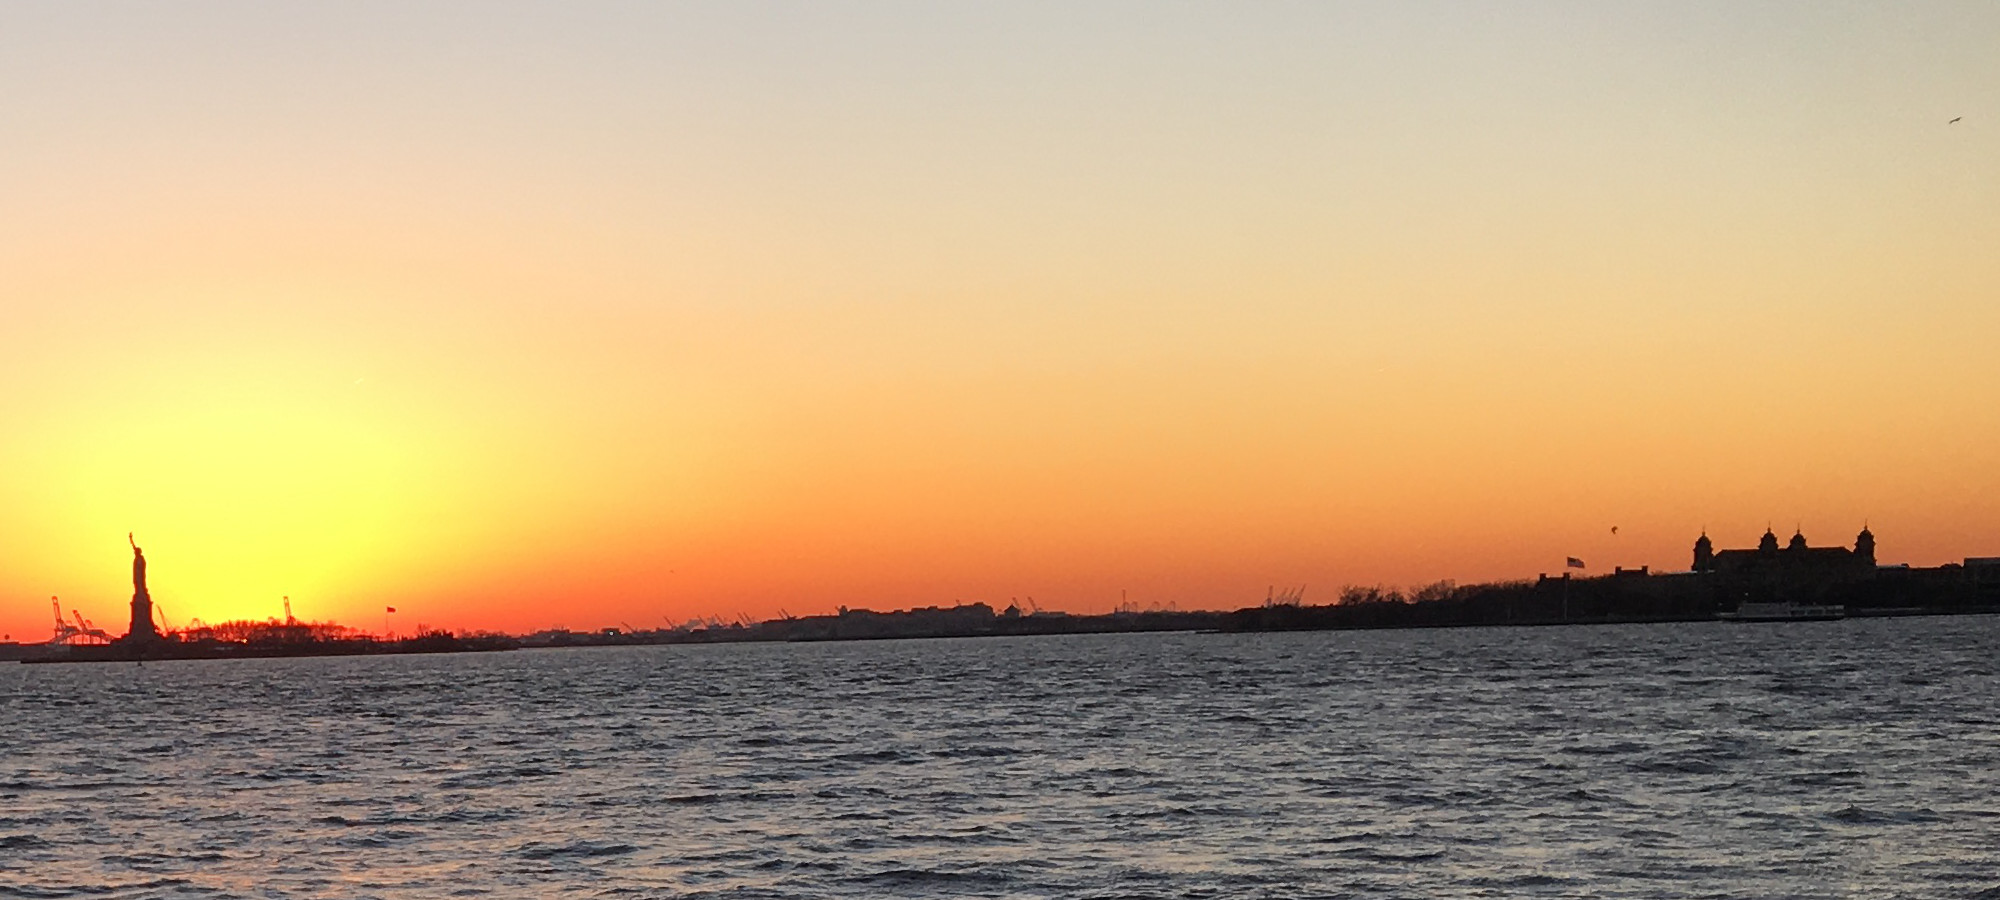 Statue of Liberty and Ellis Island at sunset